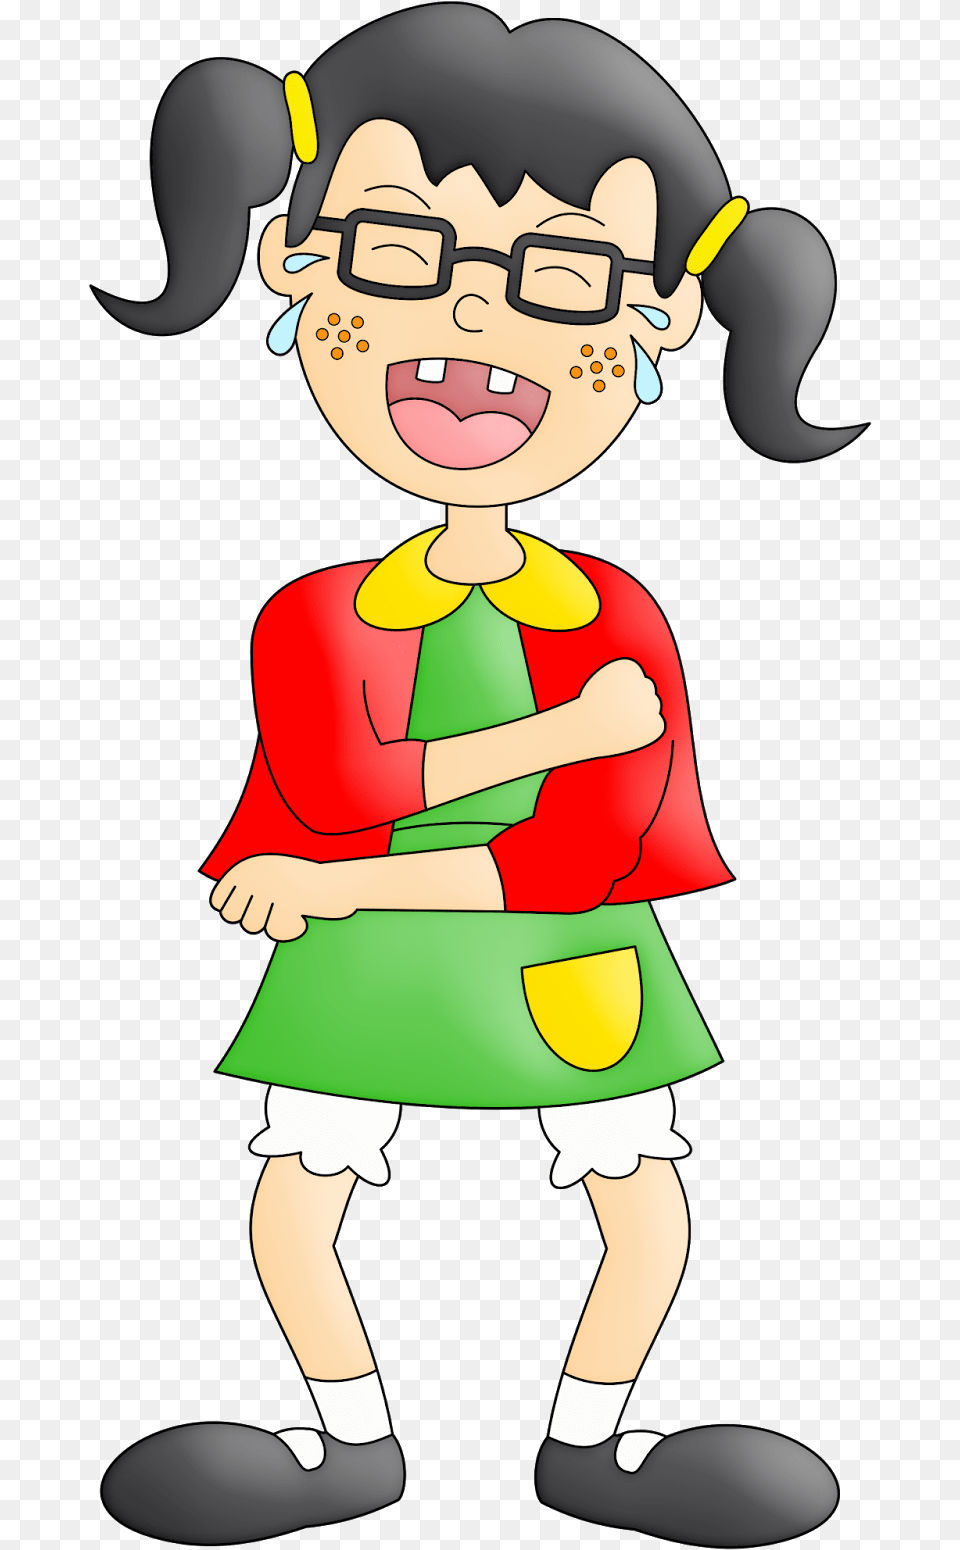 Chavo Del 8 Clipart Chavo Del 8 Animado Chilindrina, Baby, Person, Cape, Clothing Png